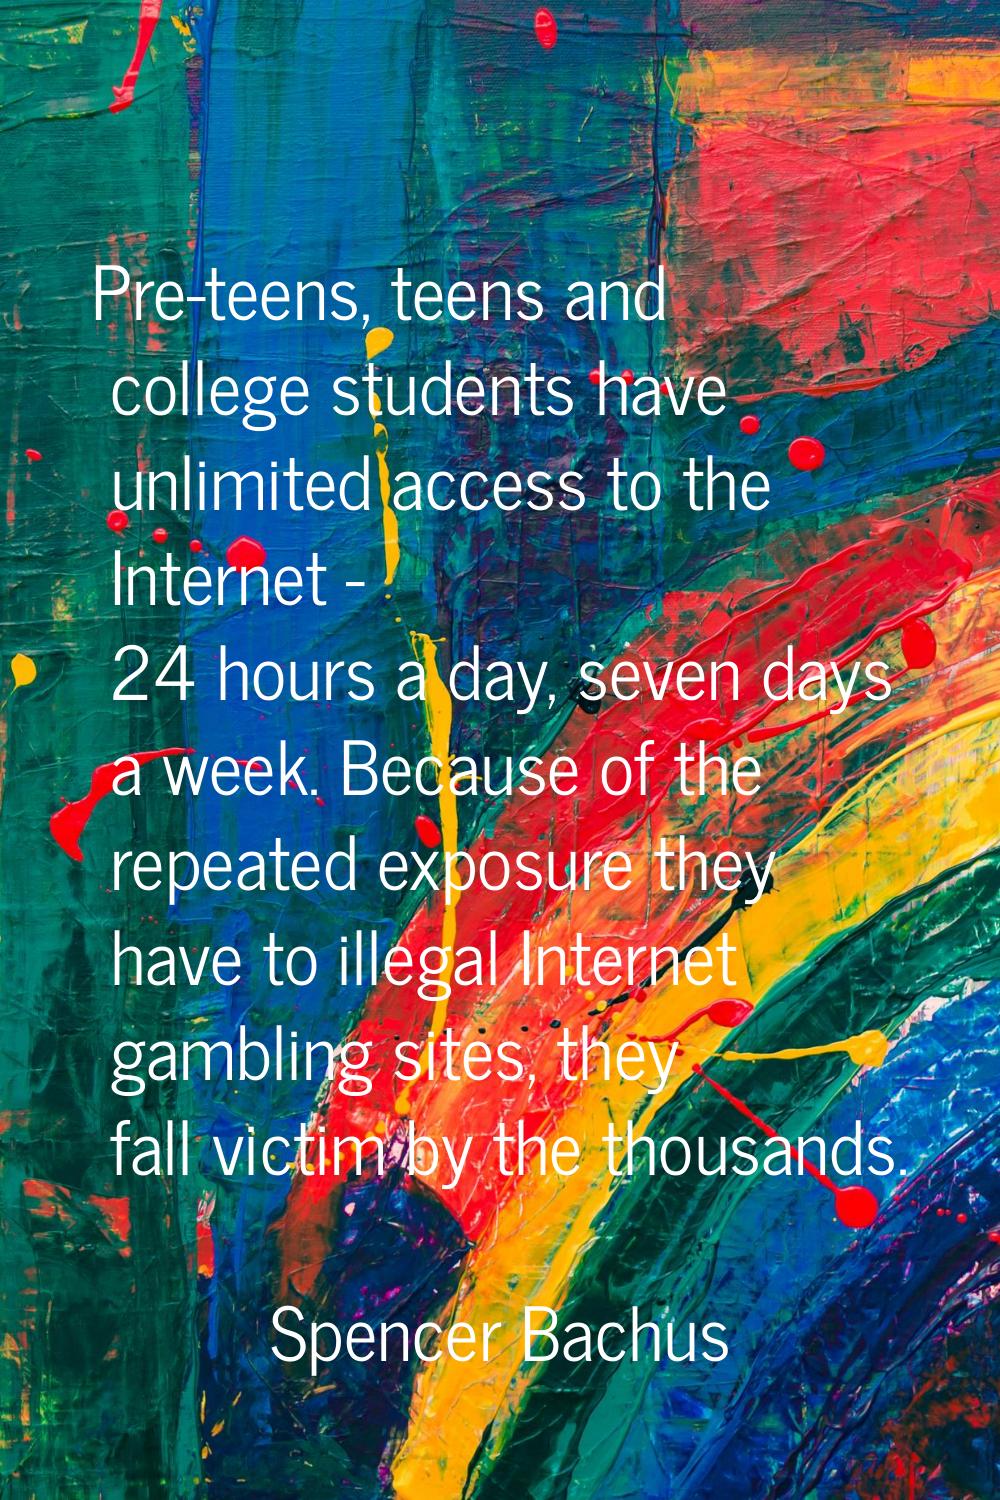 Pre-teens, teens and college students have unlimited access to the Internet - 24 hours a day, seven